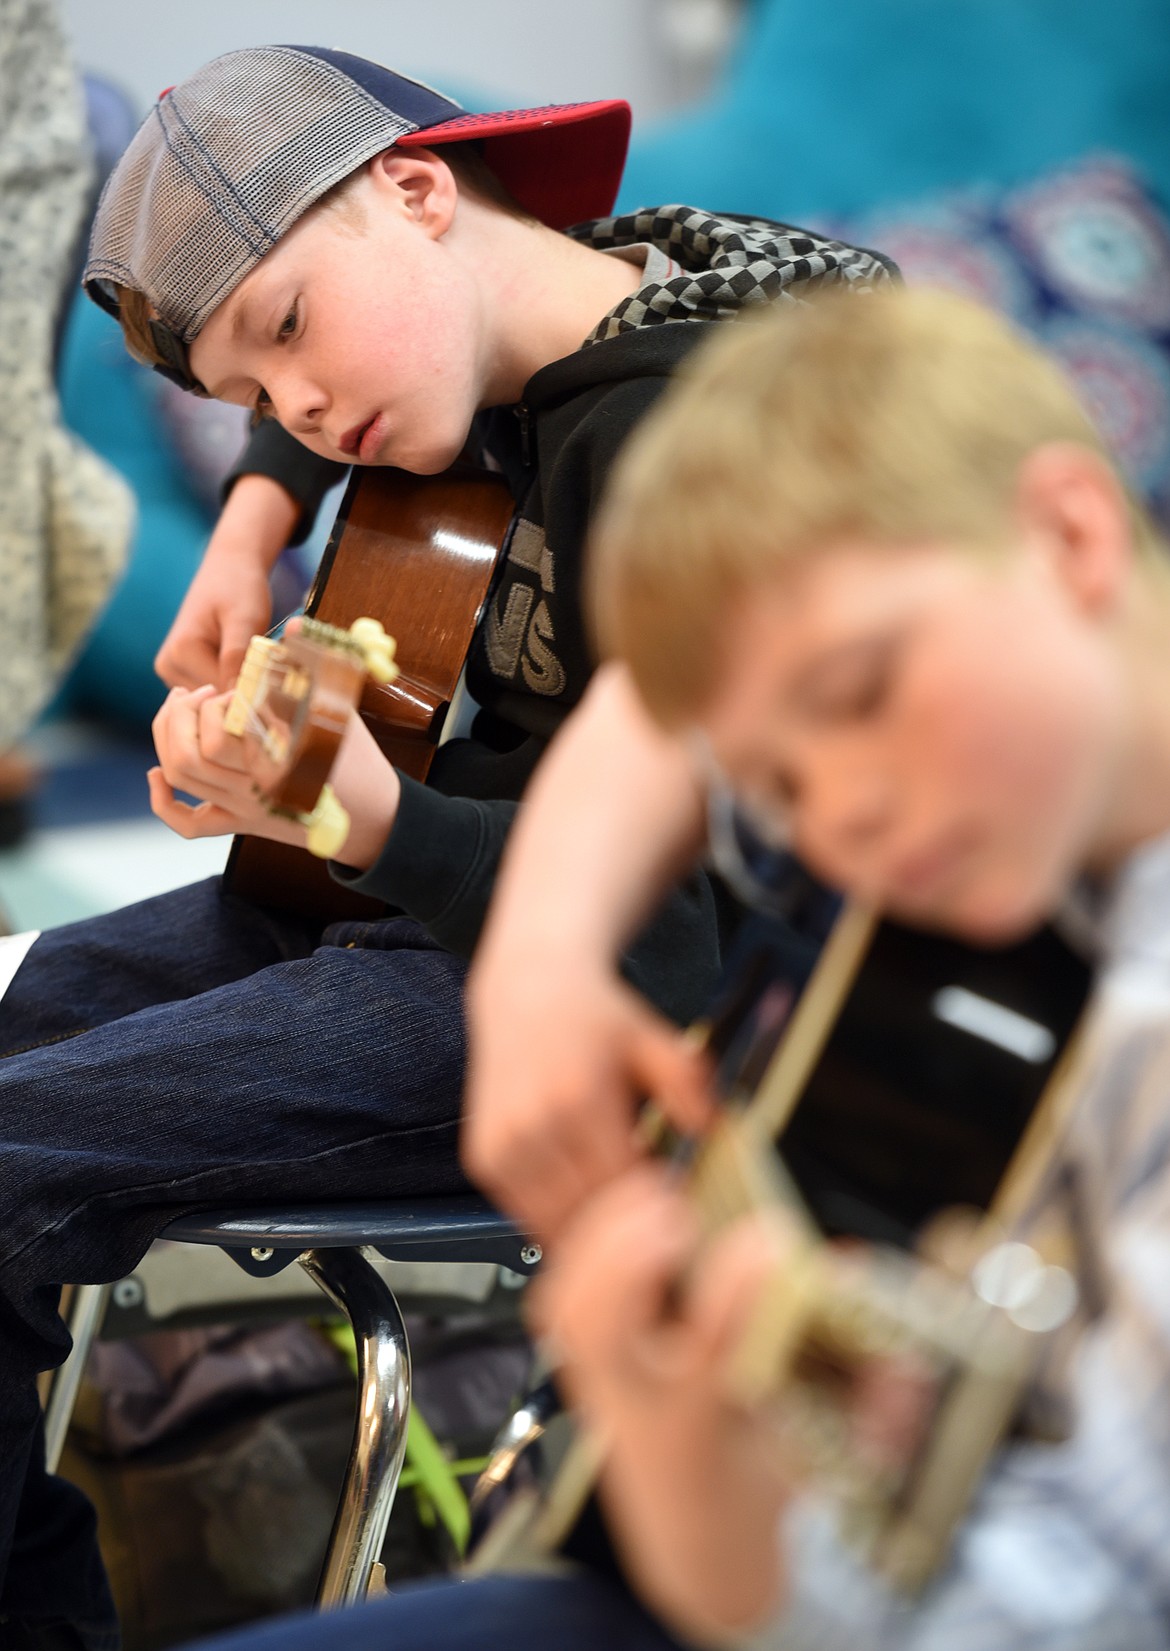 Cooper Cosand, 9, and Sam Plummer, 10, both of Bigfork, practice playing chords in the Bigfork ACES Beginning Guitar Class at Bigfork Middle School.